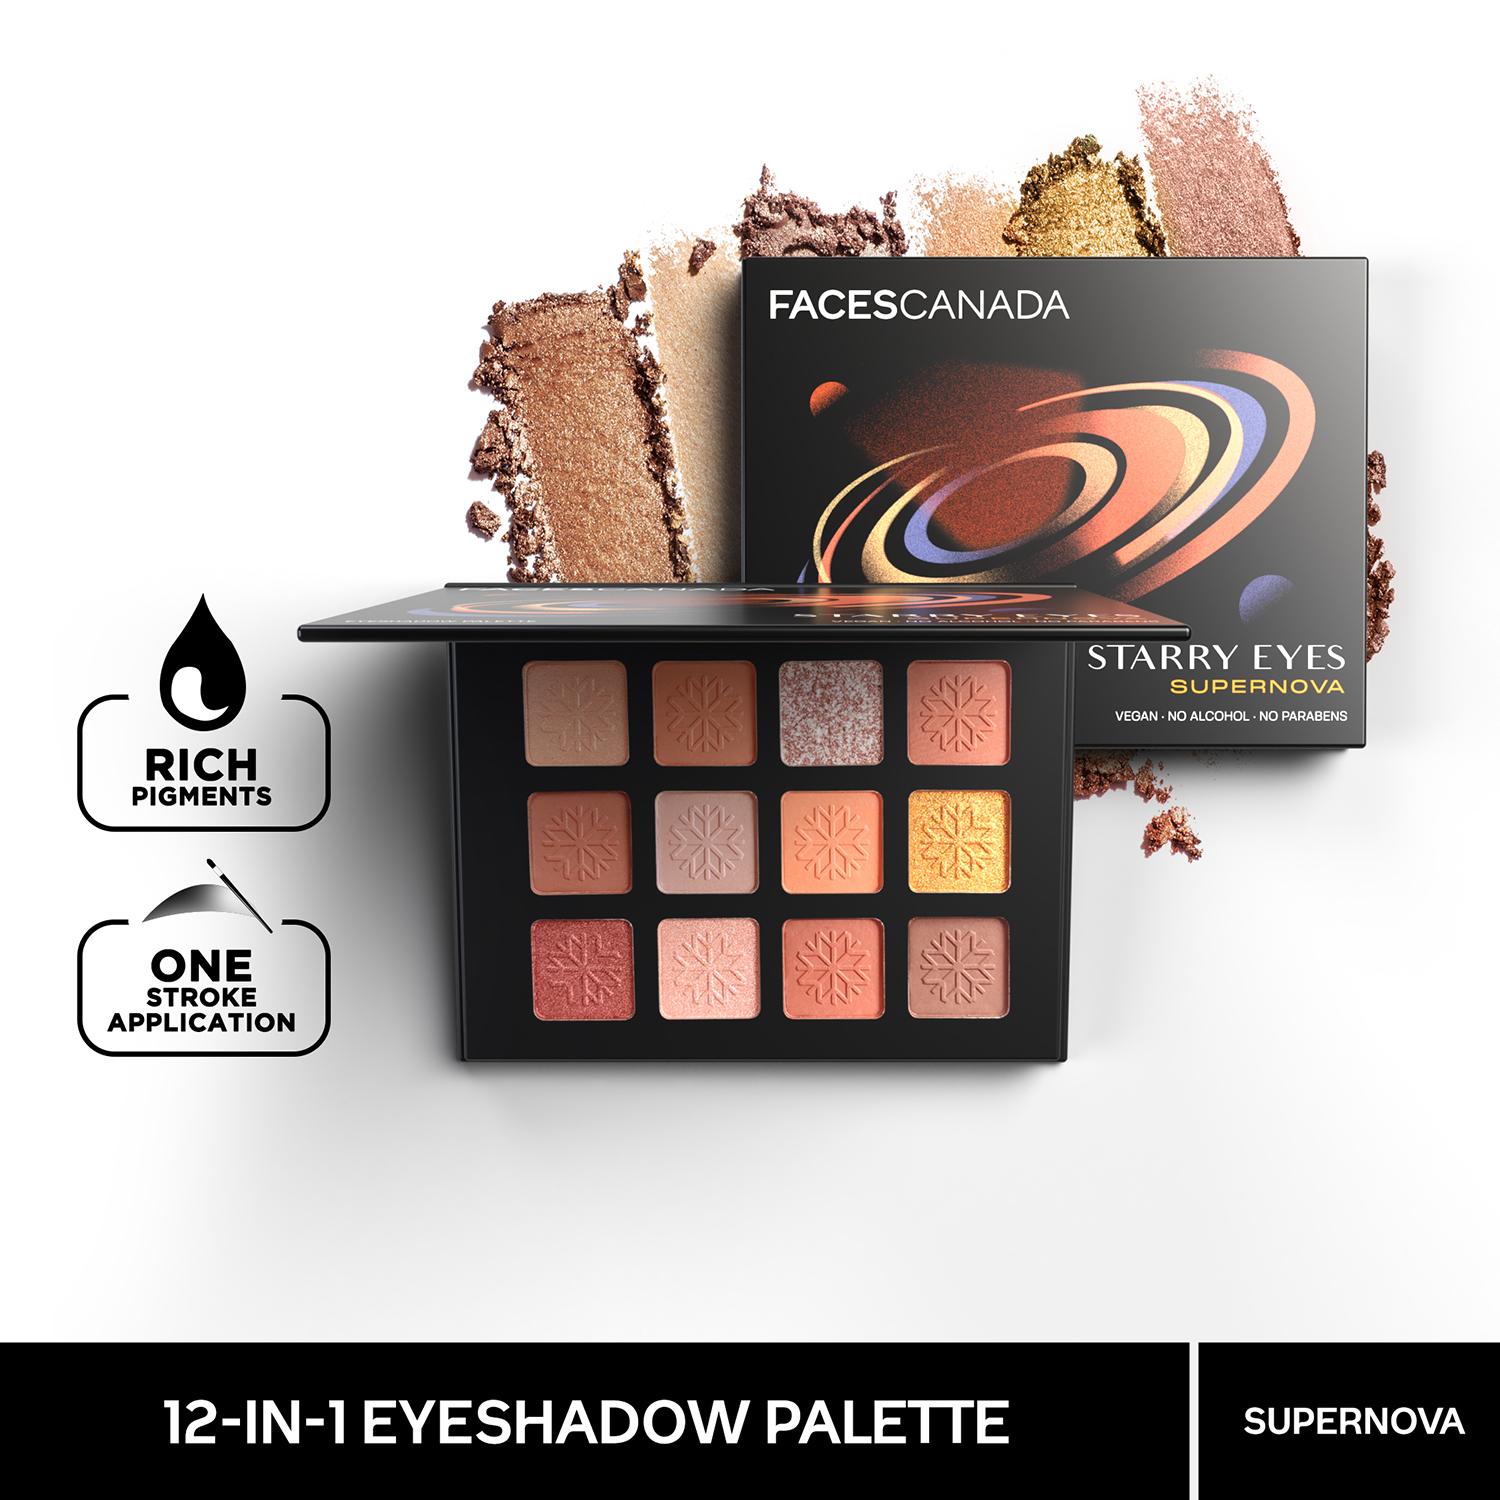 Faces Canada | Faces Canada Starry Eyes Eye Shadow Palette - Supernova 01, Shimmer & Matte Shades (16 g)